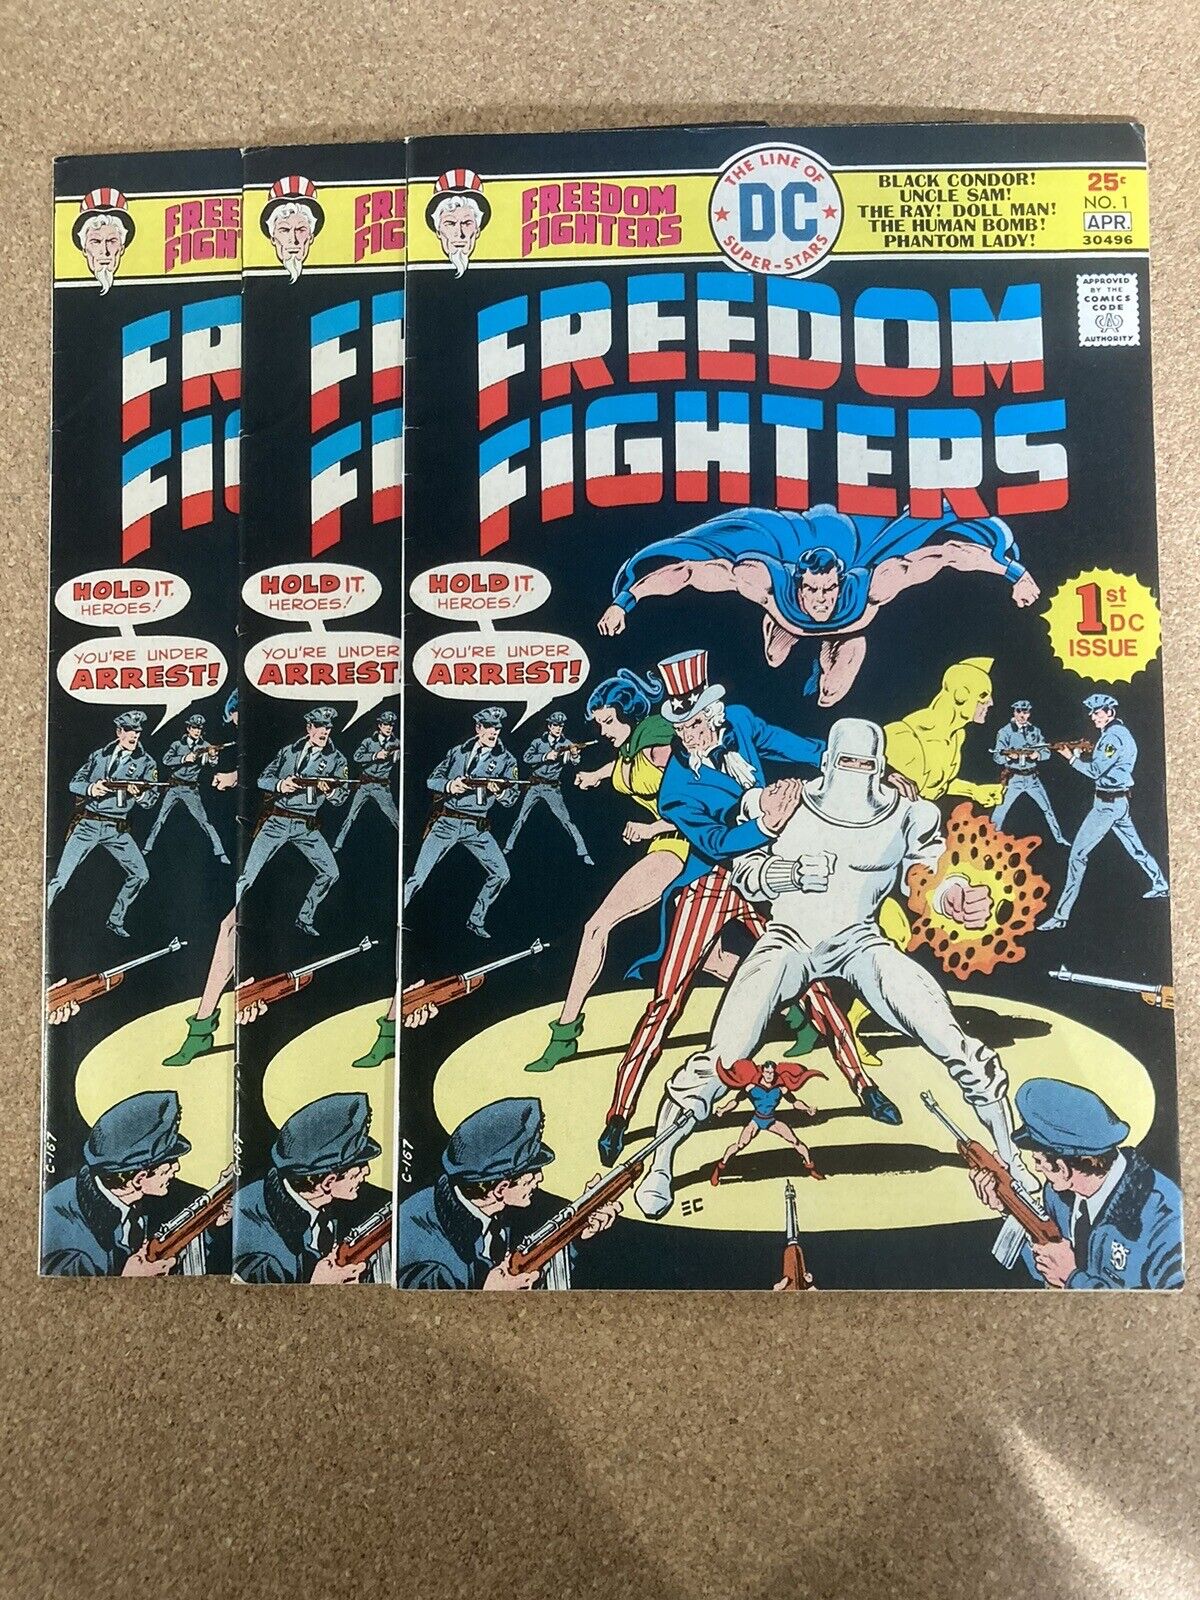 FREEDOM FIGHTERS #1 DC Comics 1976 Ernie Chan Cover VF/NM Vintage Key First Issu